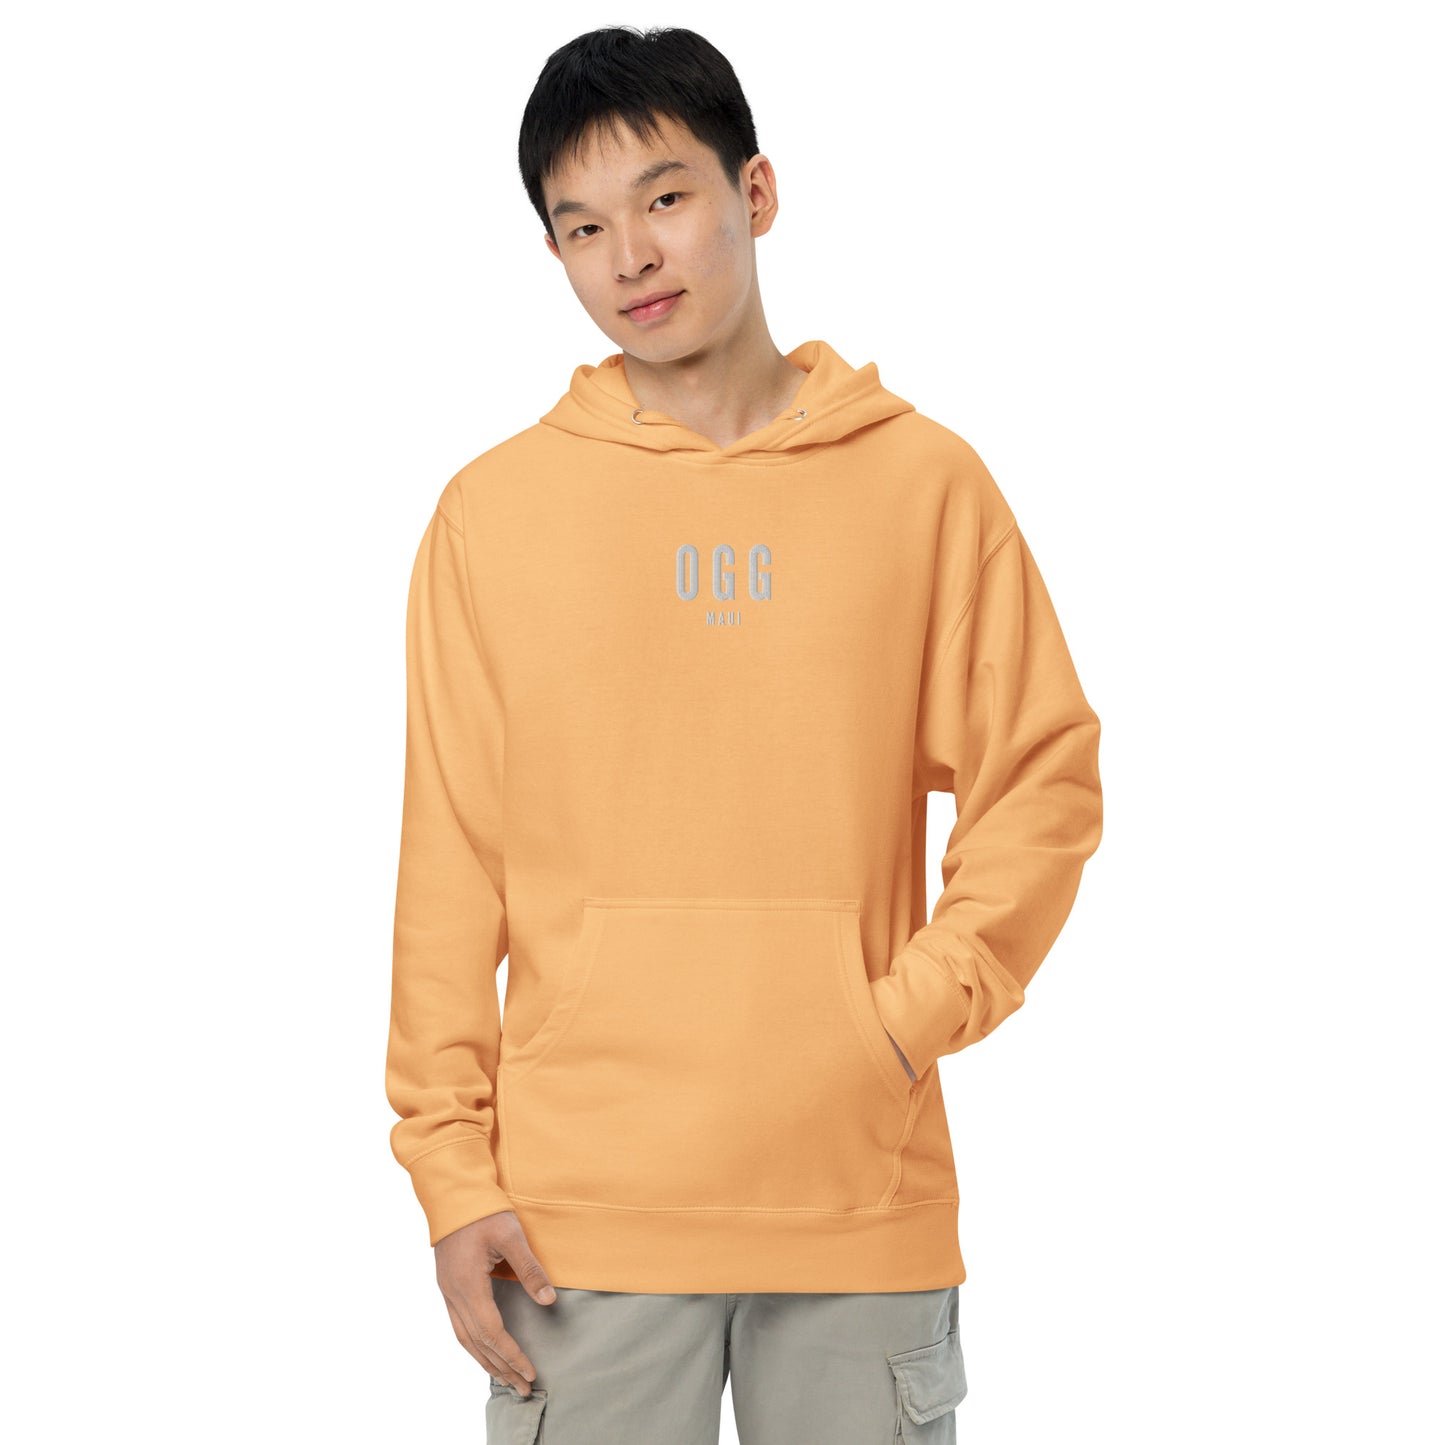 City Midweight Hoodie - White • OGG Maui • YHM Designs - Image 06